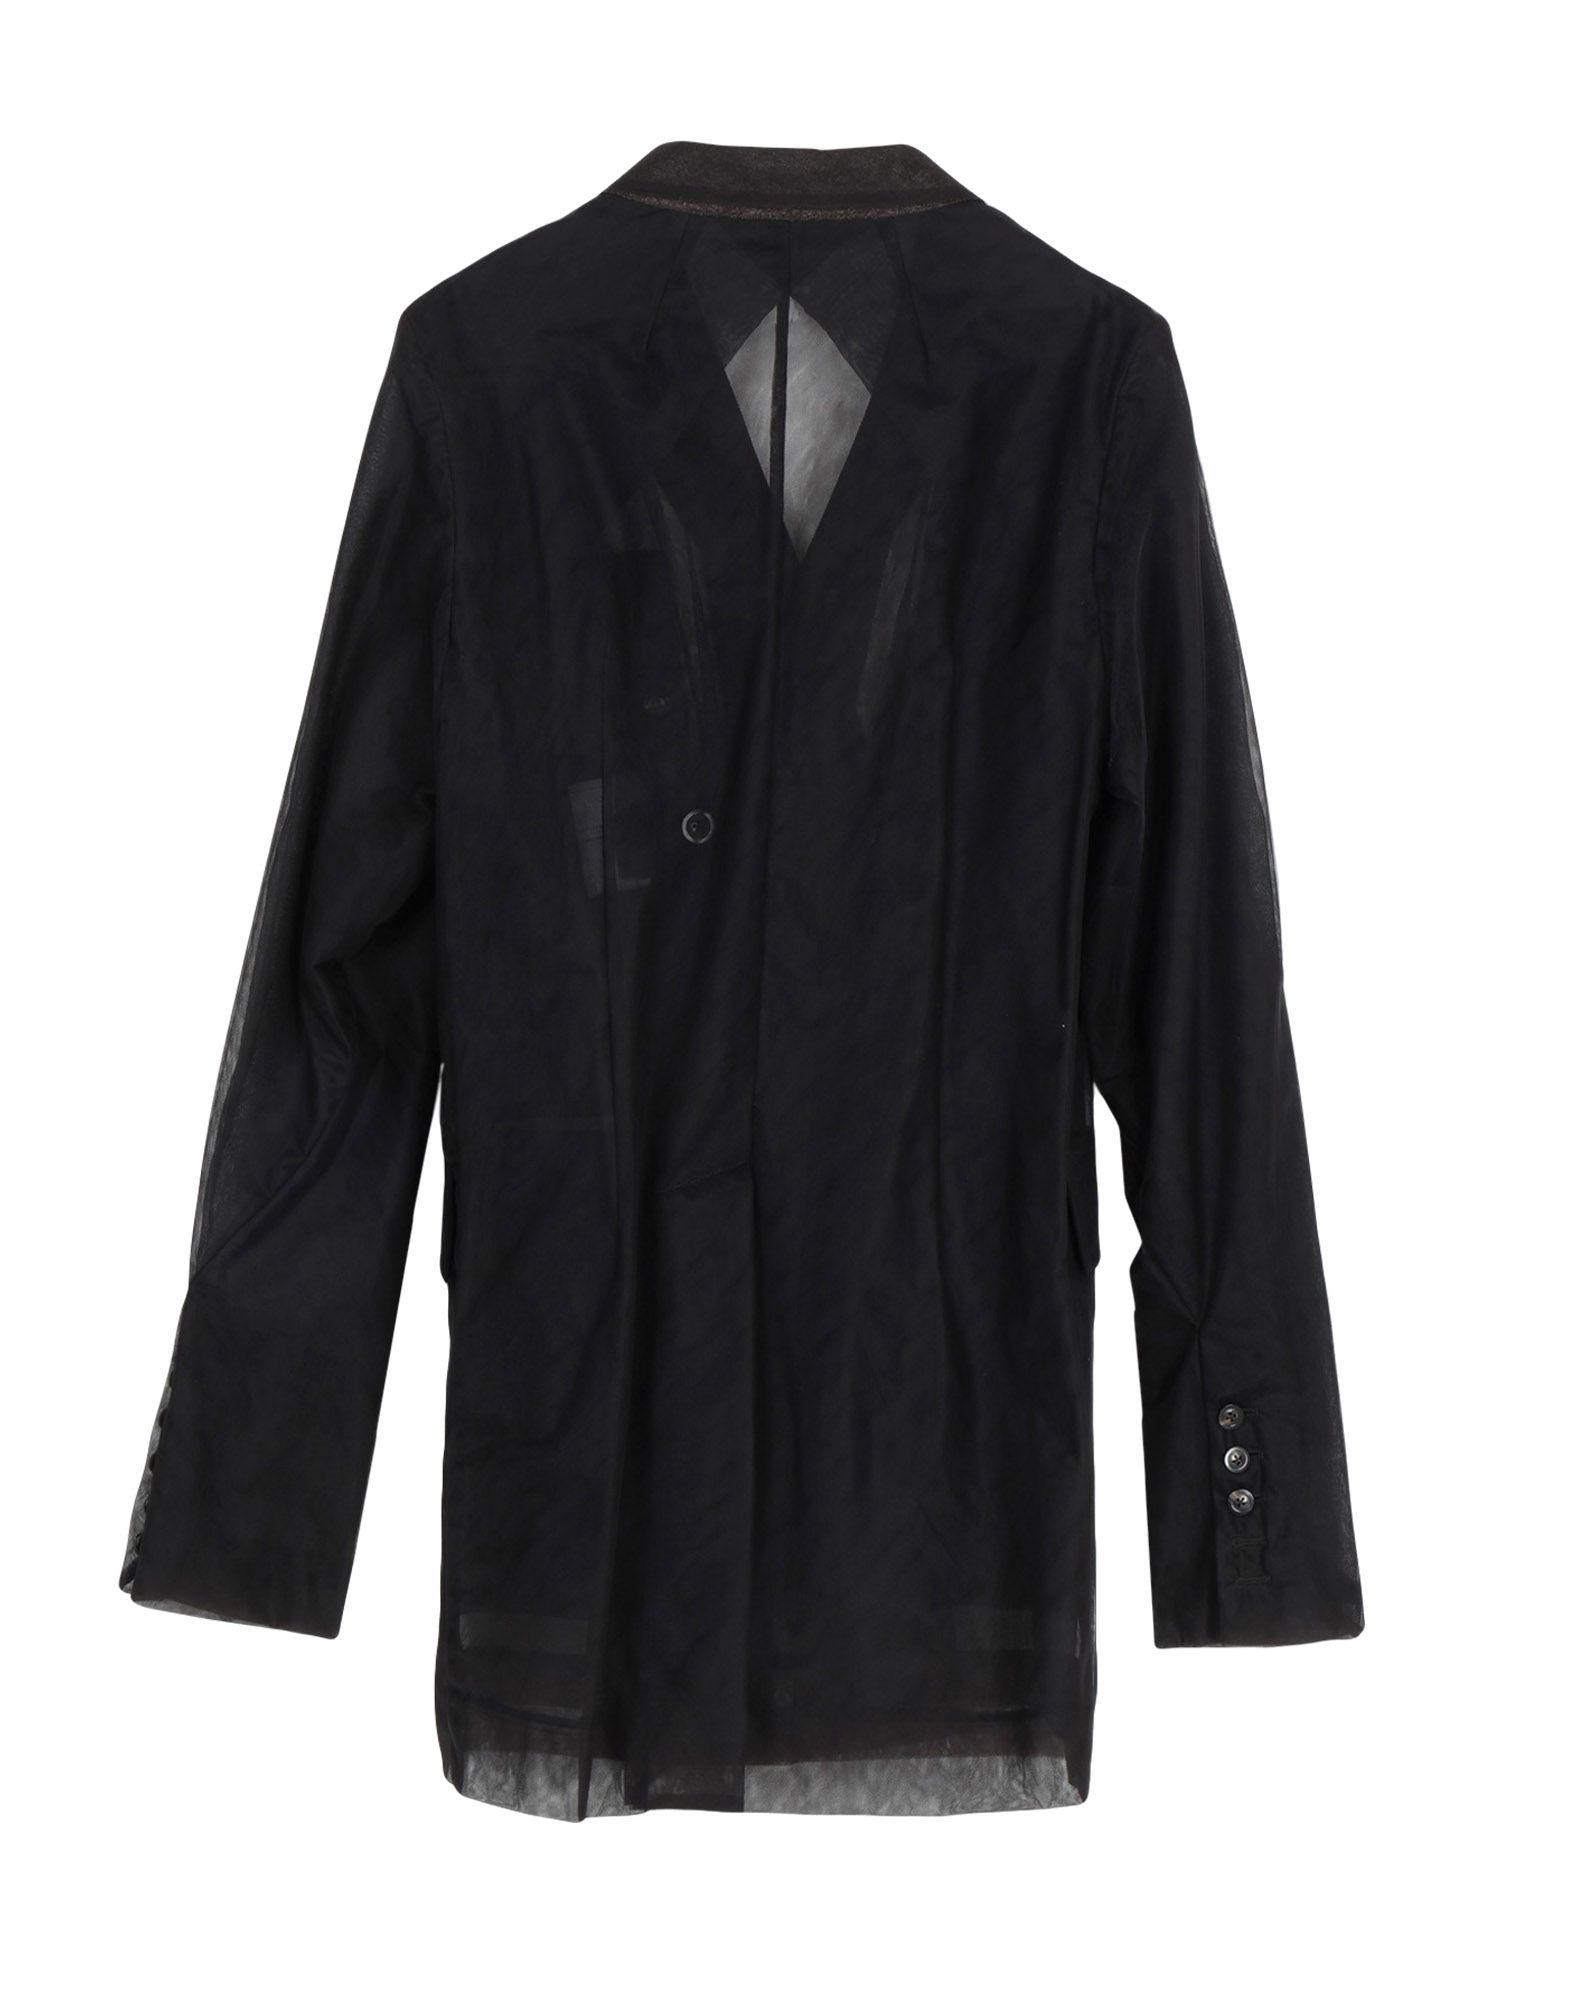 Rick Owens Synthetic Overcoat in Black for Men - Lyst